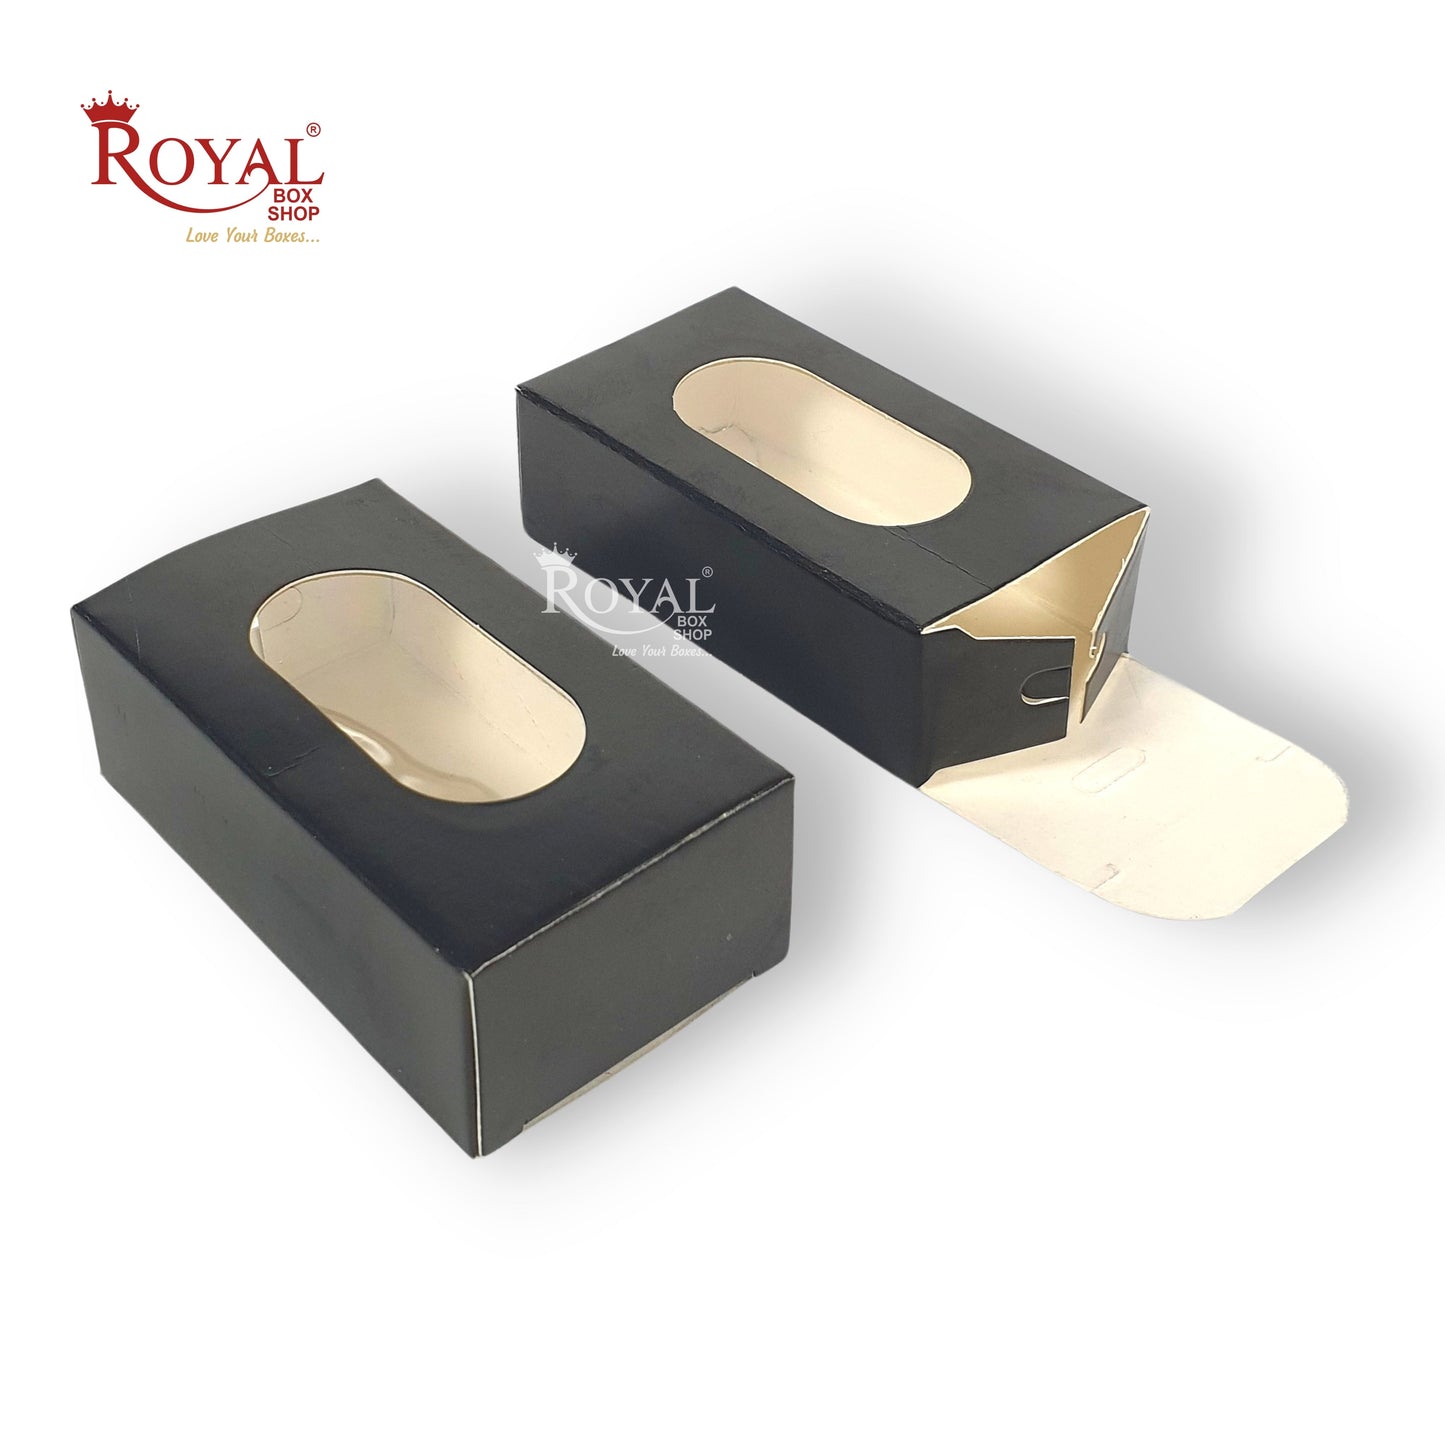 Cakesicles Boxes I 1 Cavity I Black I 5 x 9 x 3 CM I For Return Gifts, Birthday Party, Bakery Boxes, Candy Boxes Royal Box Shop